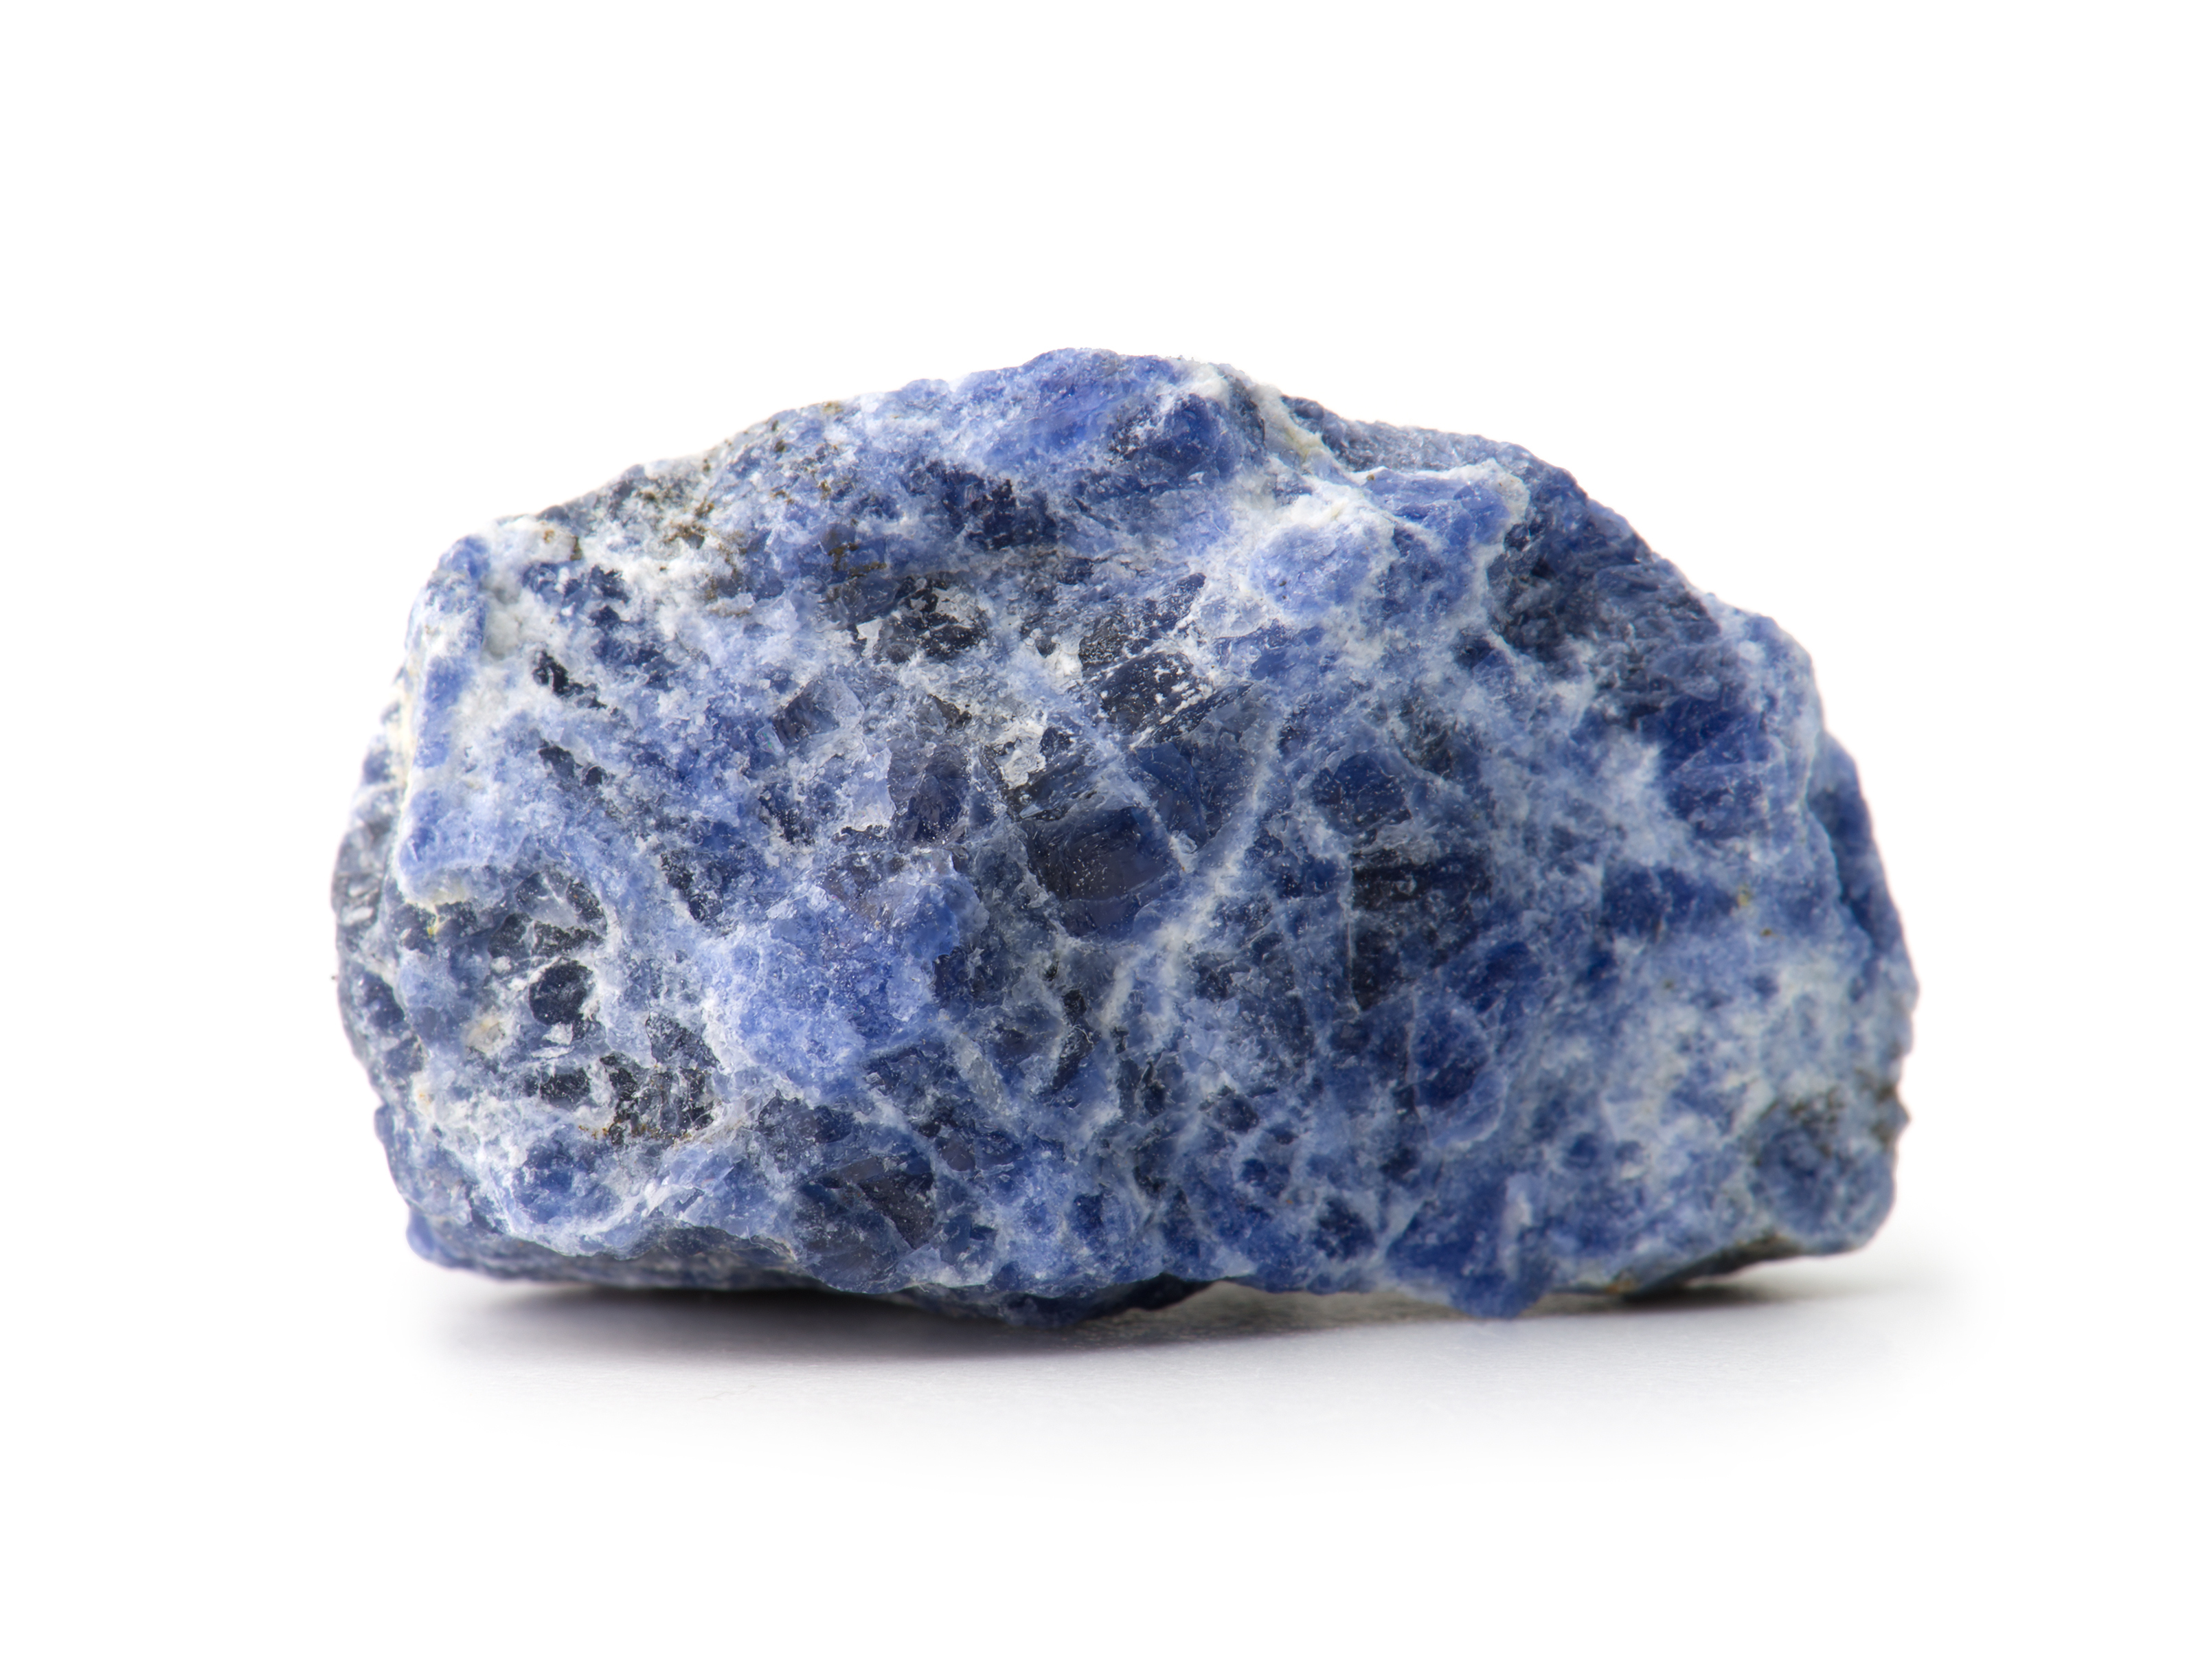 A piece of Sodalite rock on a white background